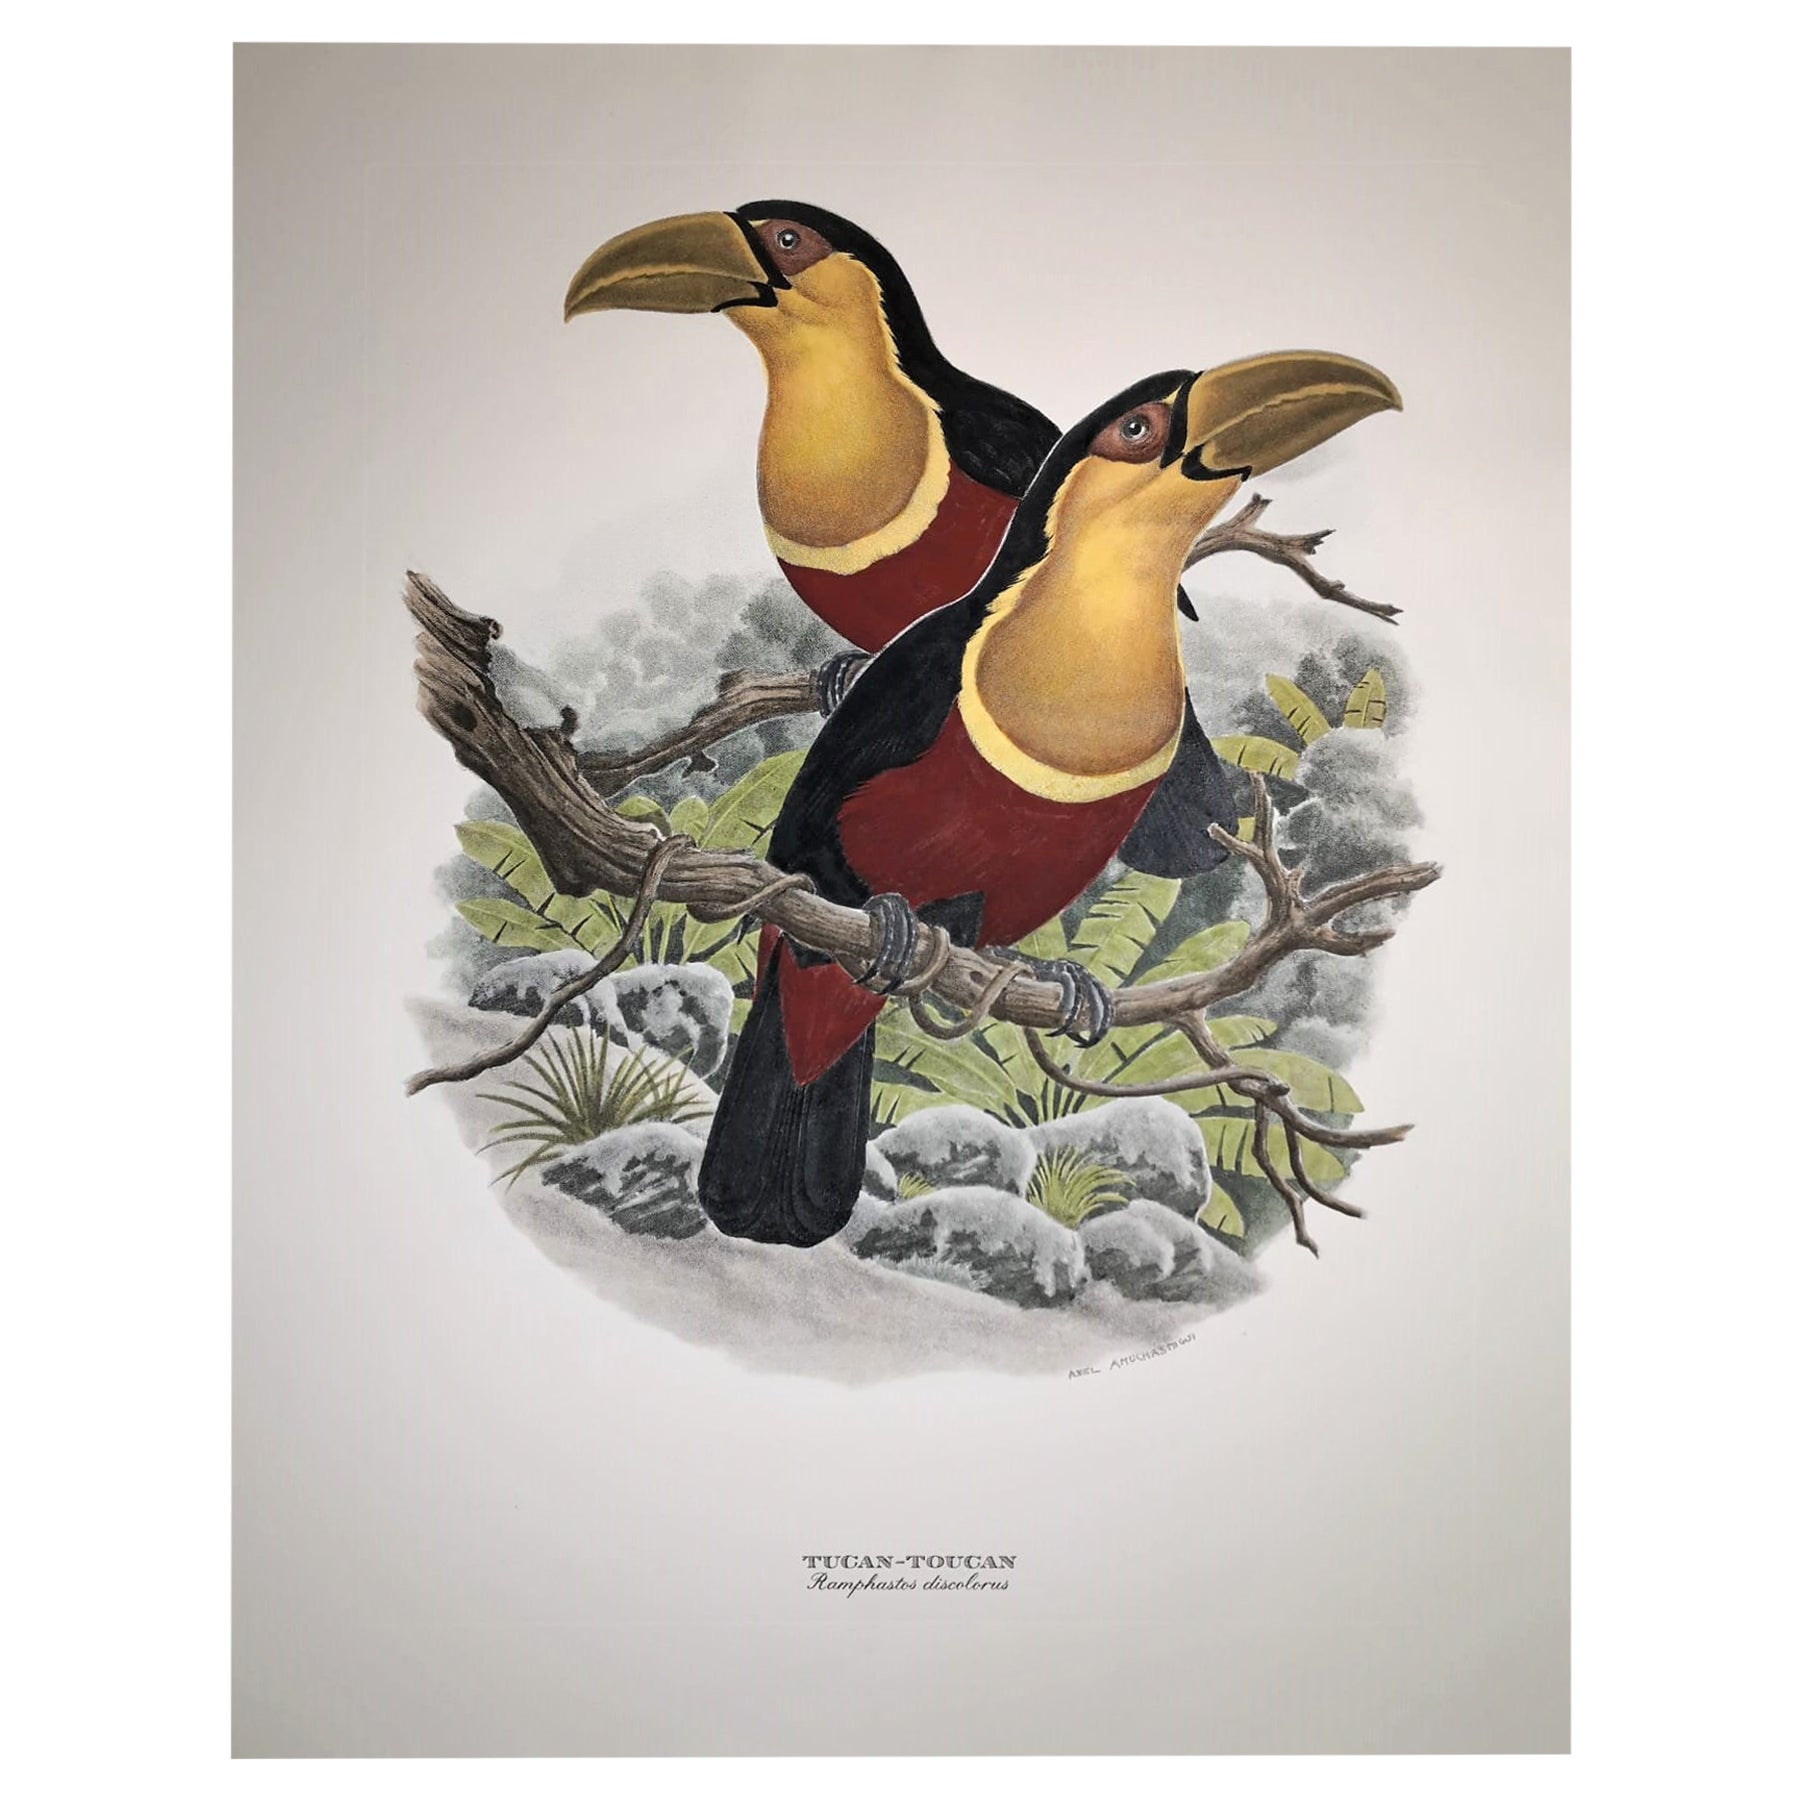 Italian Contemporary Hand Colored Print Axel Amuchastegui "Tucan" Red Tones For Sale